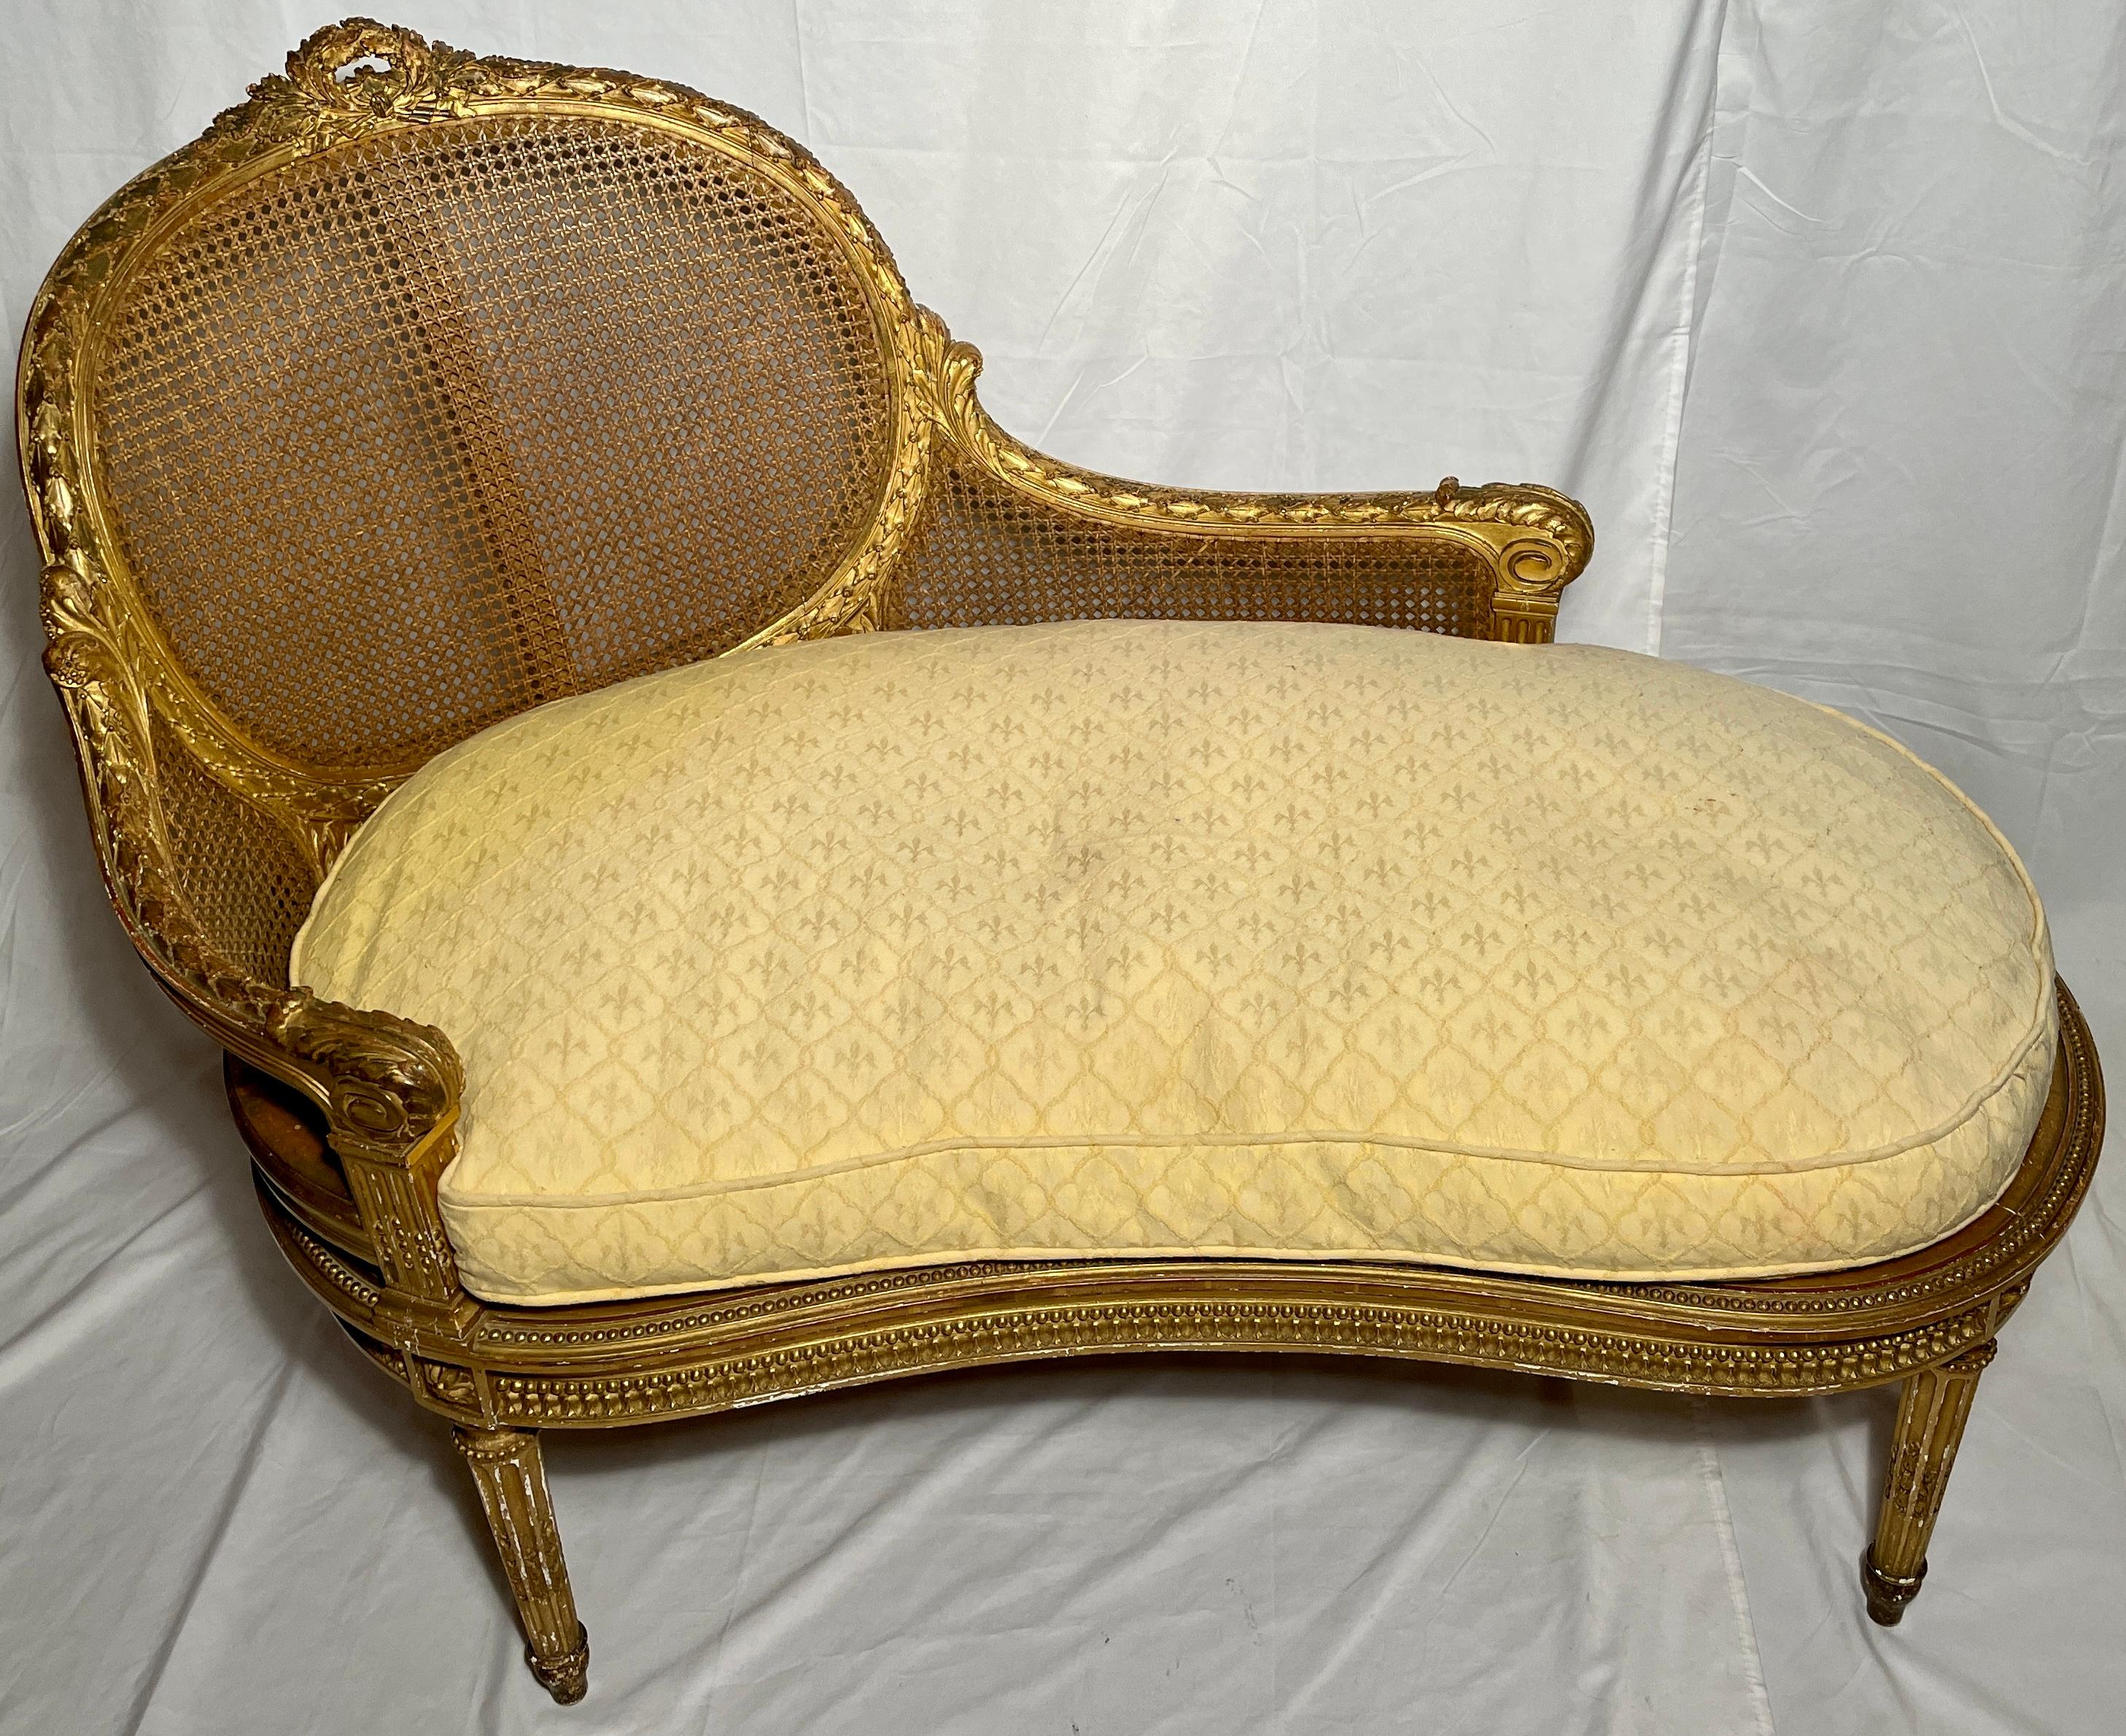 Antique French Louis XVI carved gilt wood and cane recamier or chaise lounge, circa 1890.  With Yellow Upholstered Cushion.